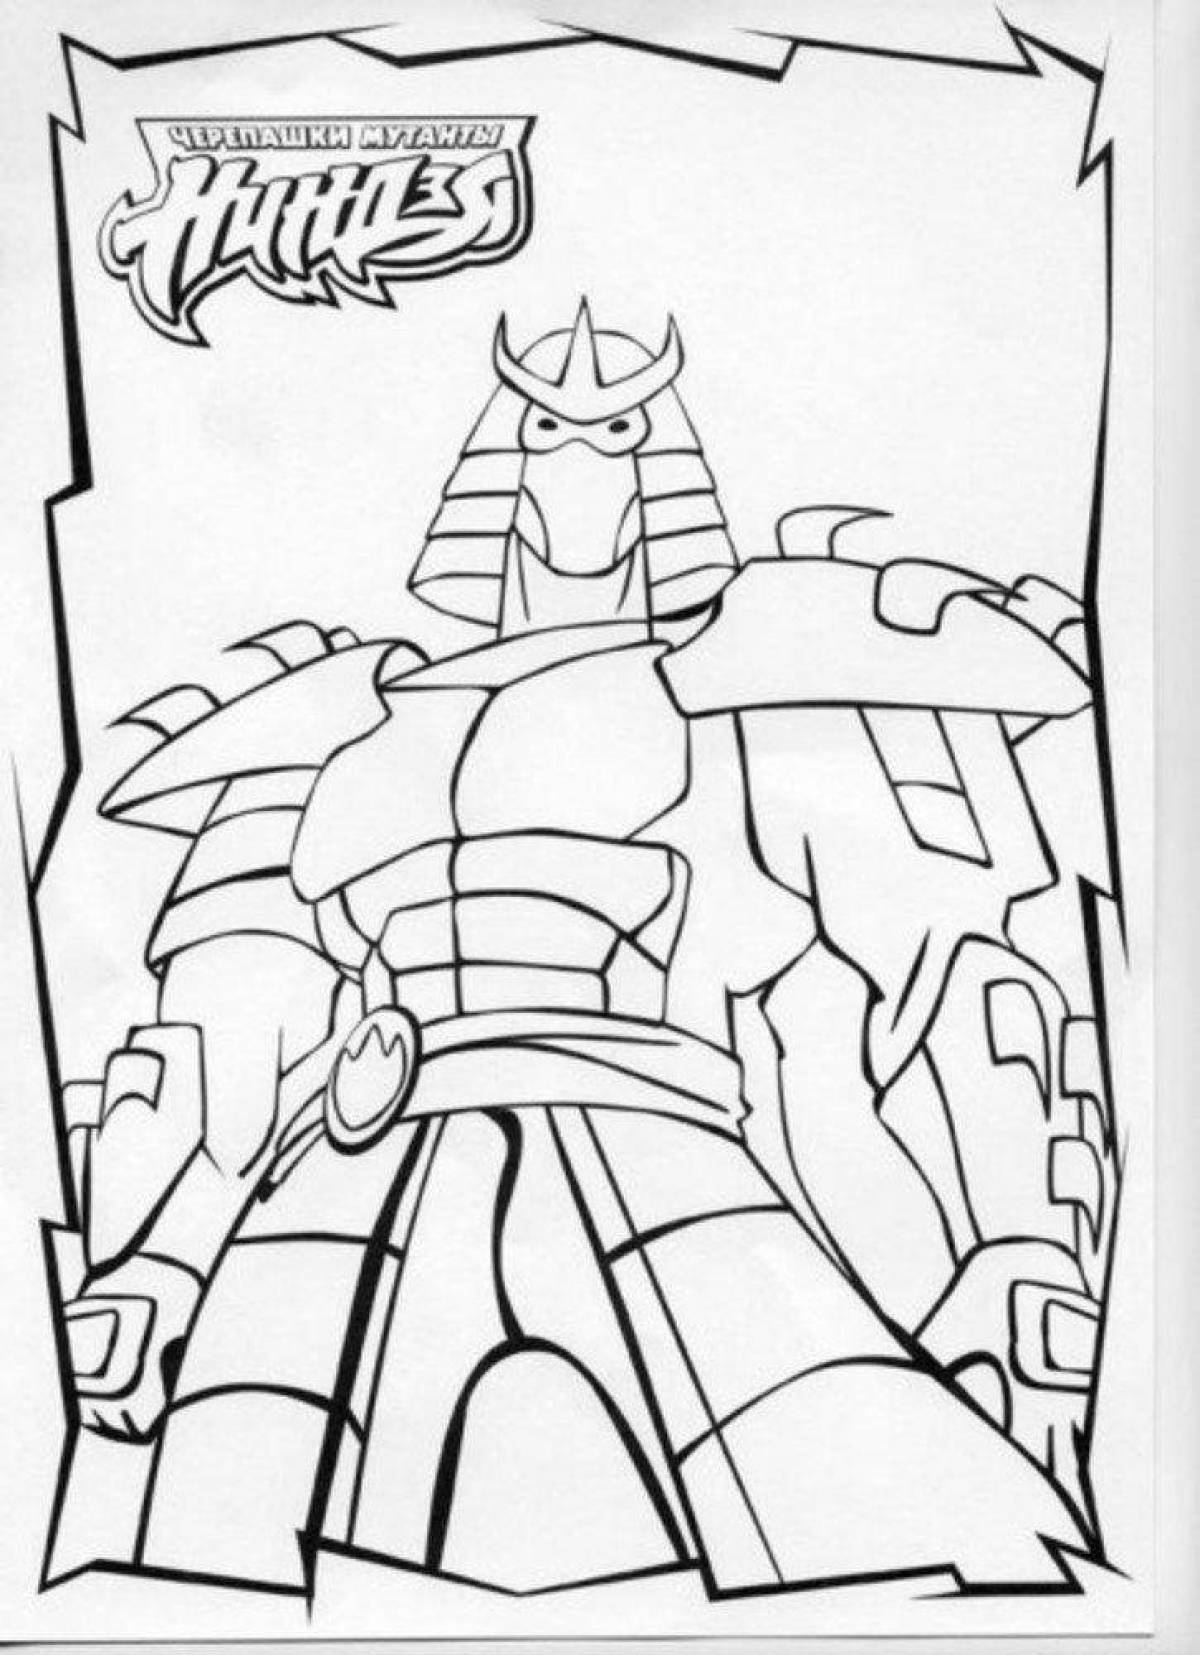 Amazing shredder coloring page